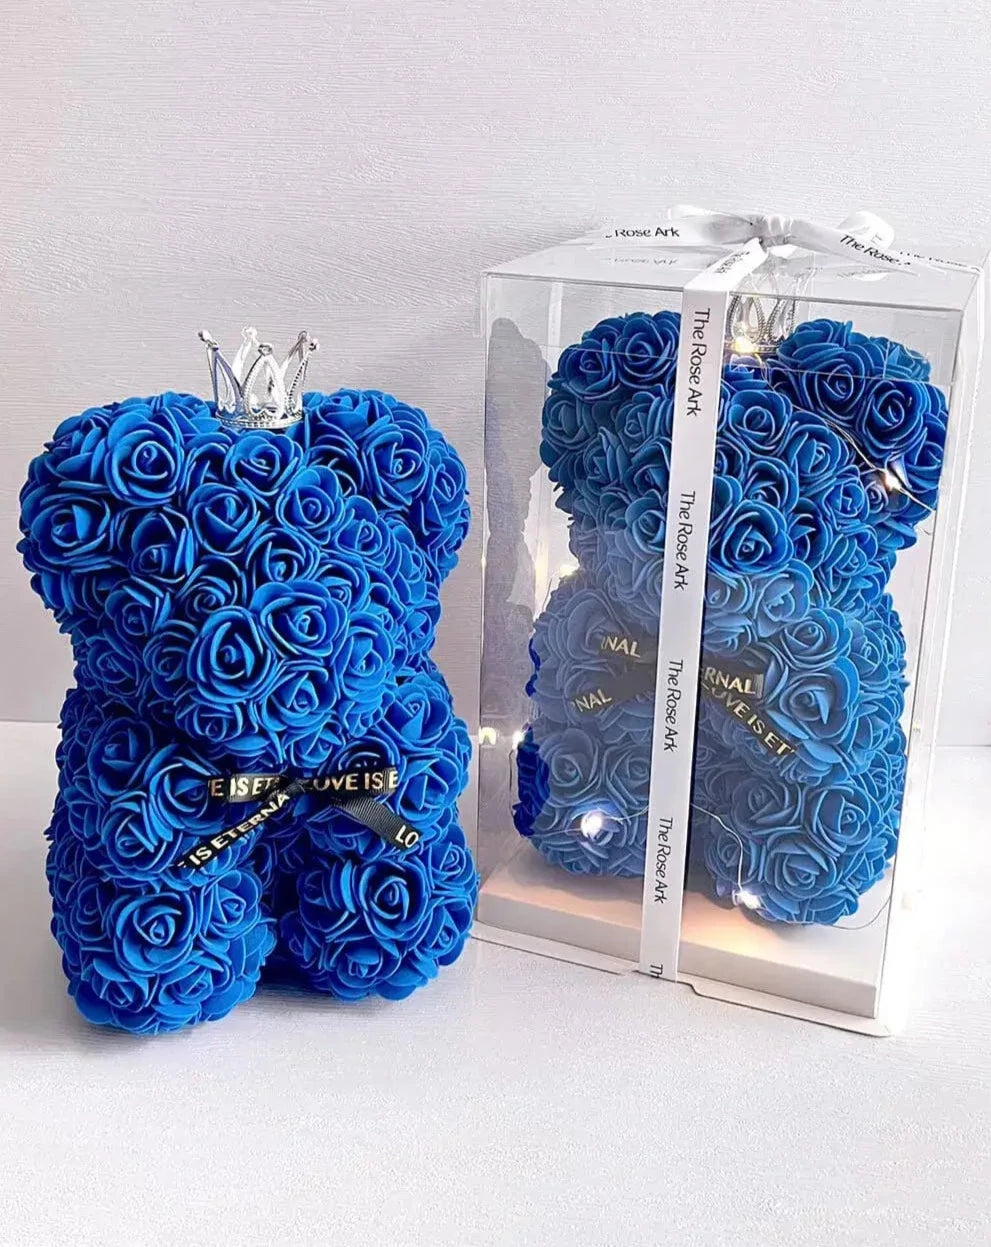 25cm Blue Rose Bear with Fairy Lights in Box The Rose Ark